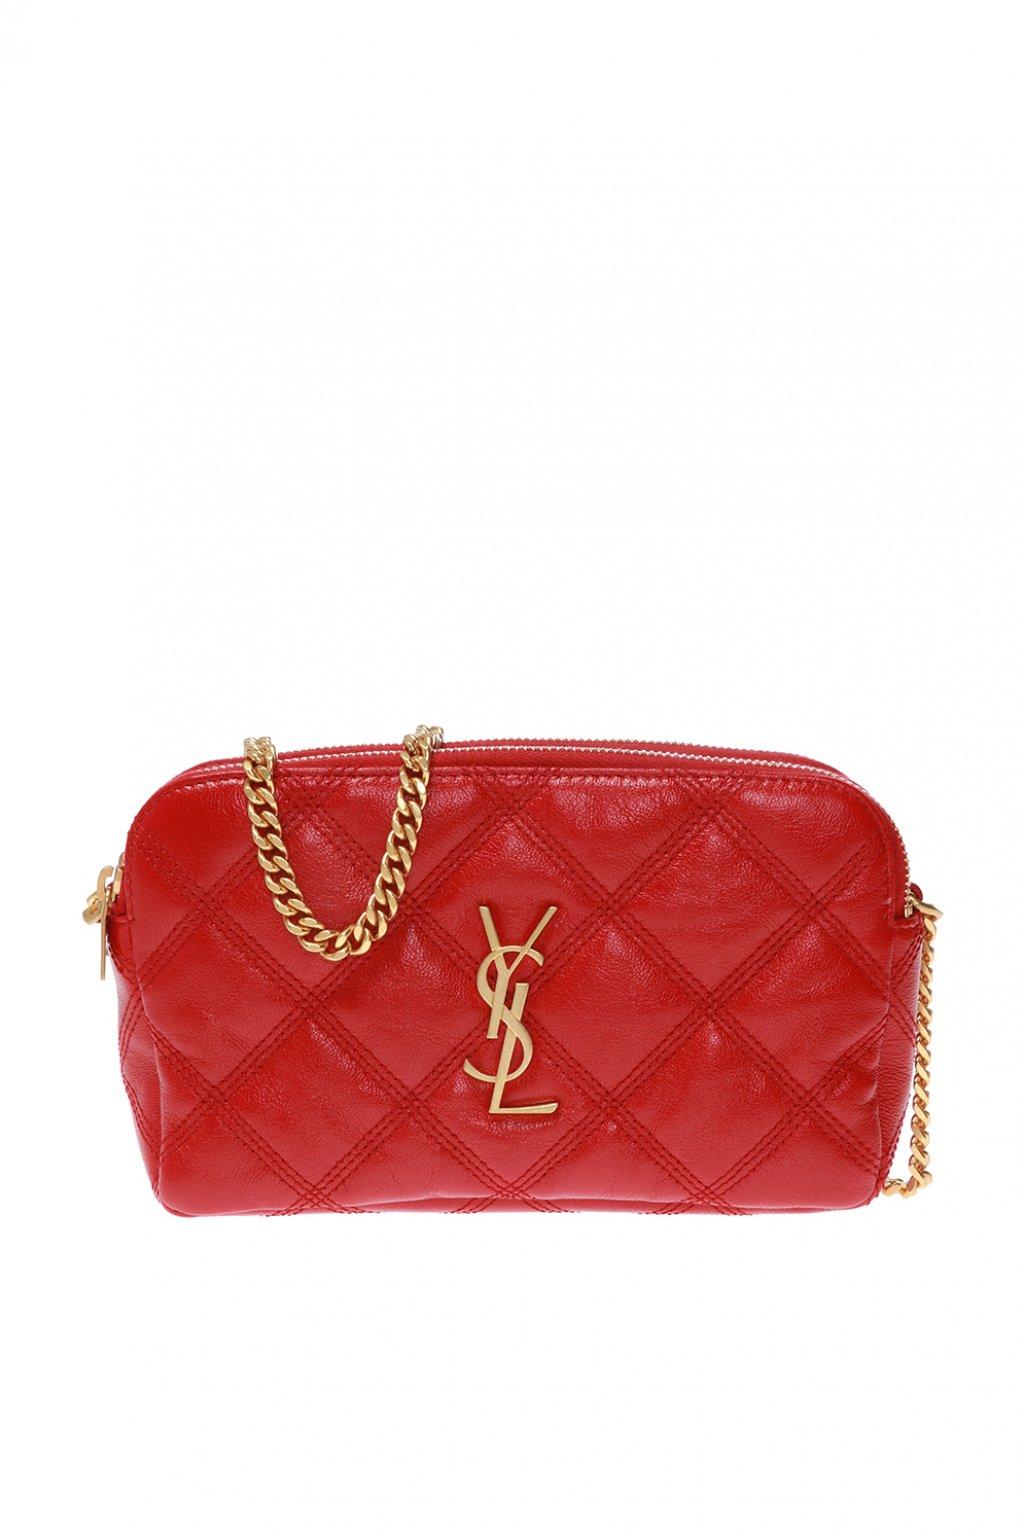 Saint Laurent Leather Becky Bag in Red | Lyst